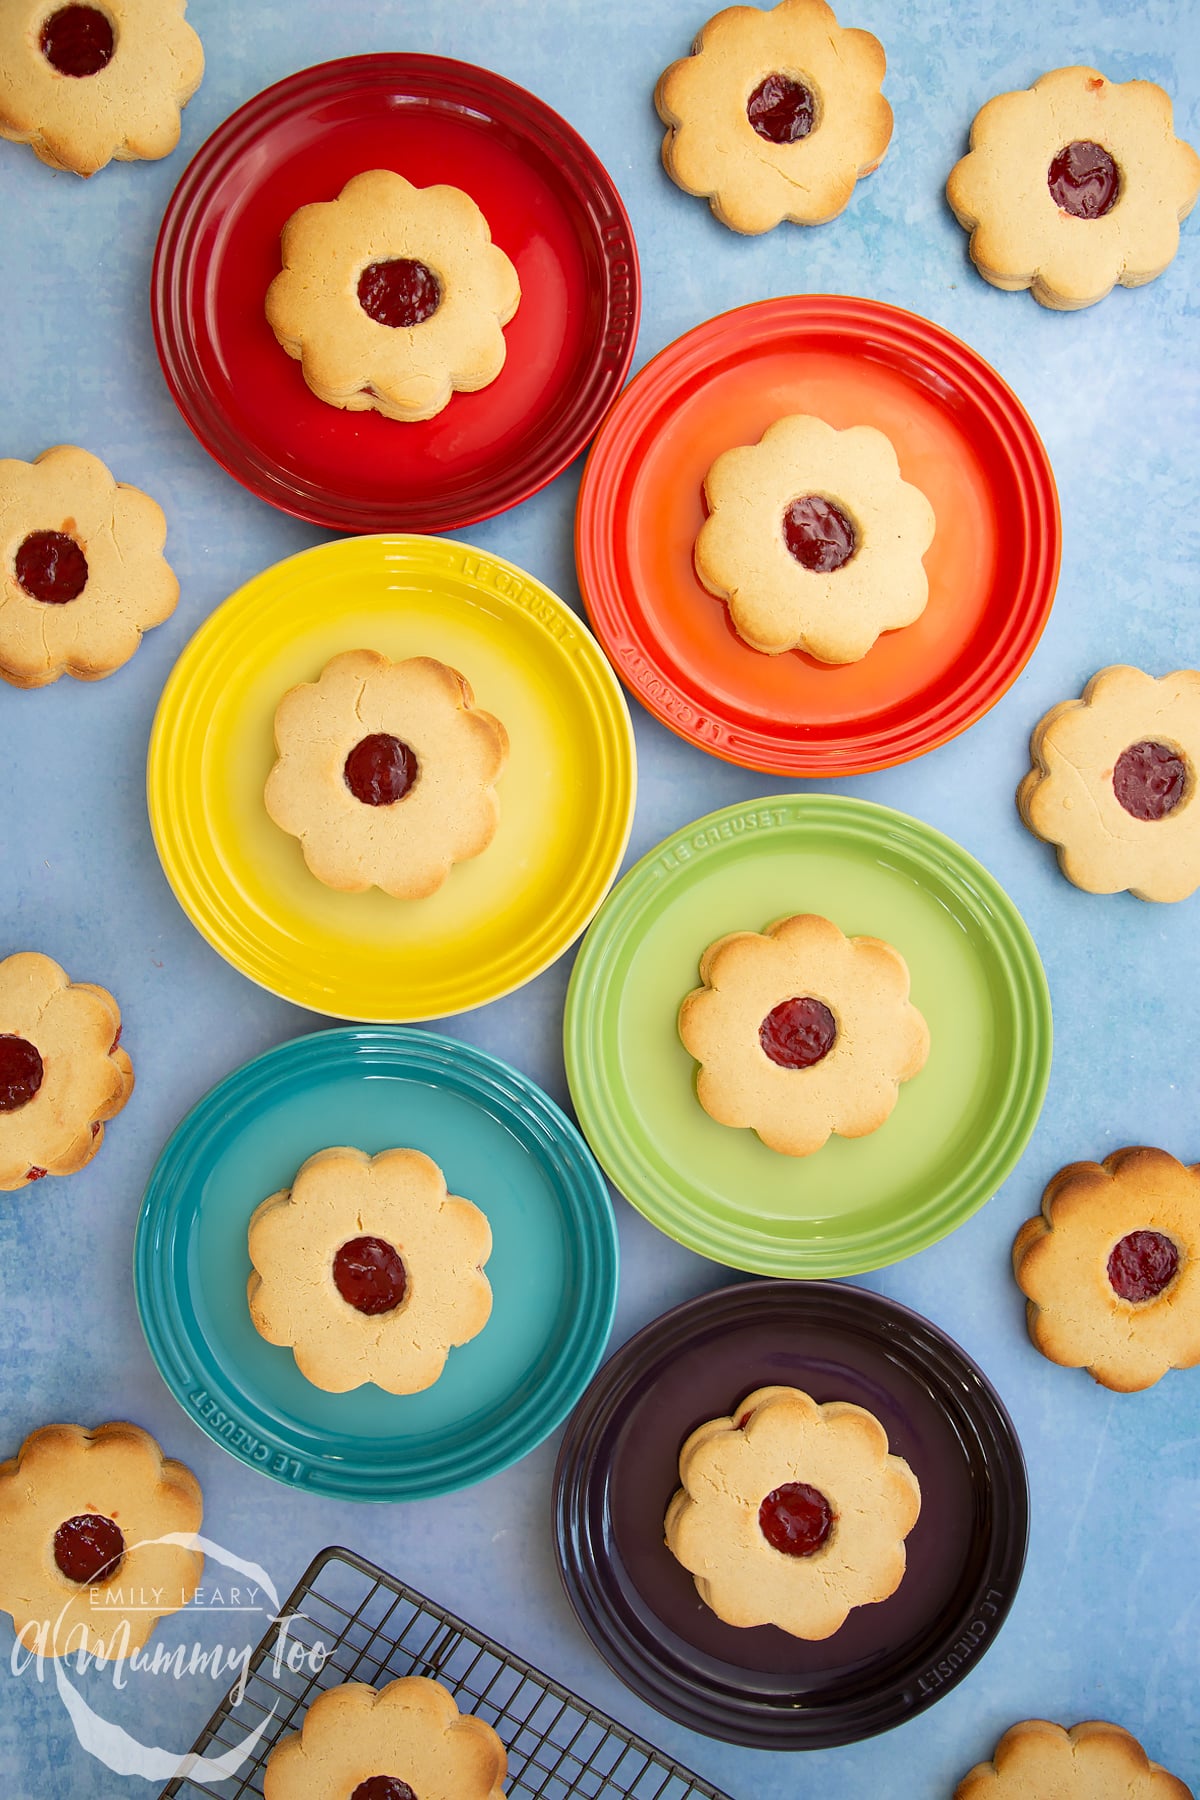 Giant jammie dodgers arranged on a variety of coloured small plates.